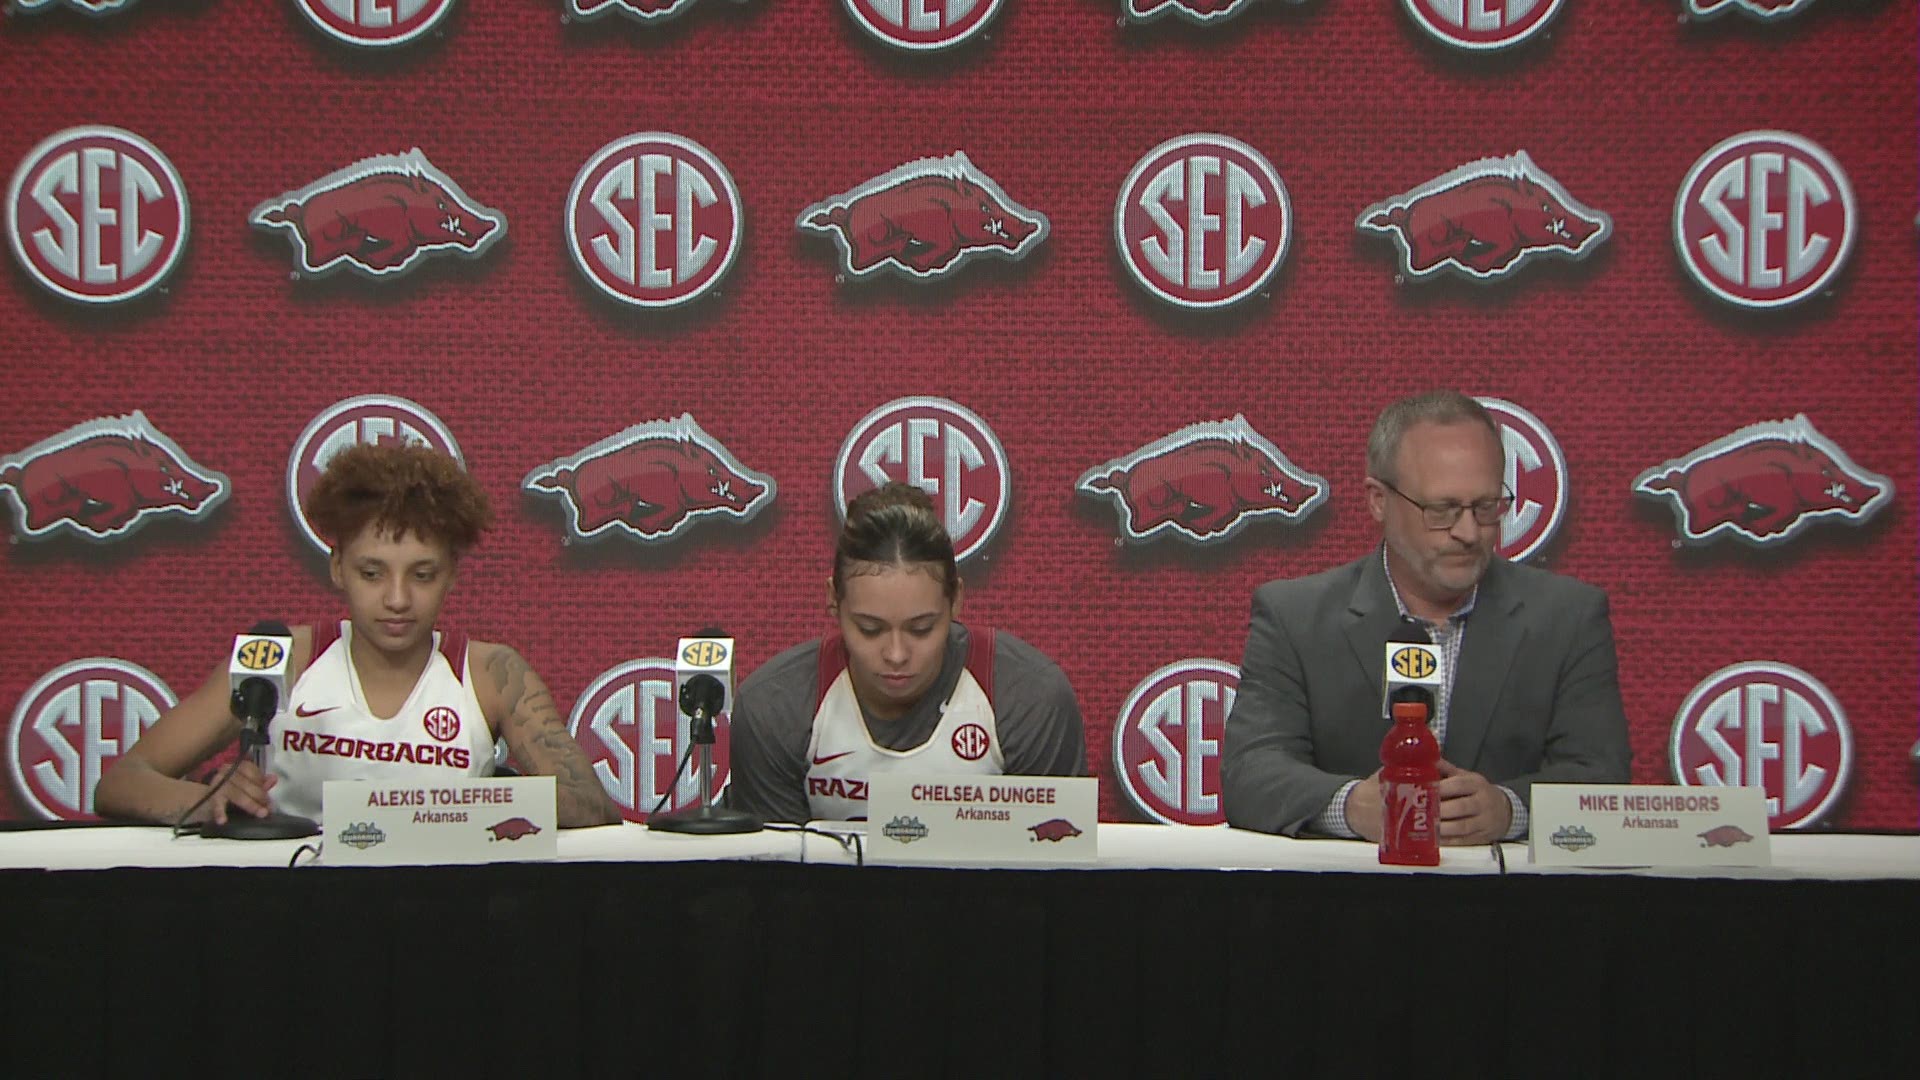 The Arkansas Razorbacks women's basketball team made 17 3-pointers in their 90-68 win over the Auburn Tigers.